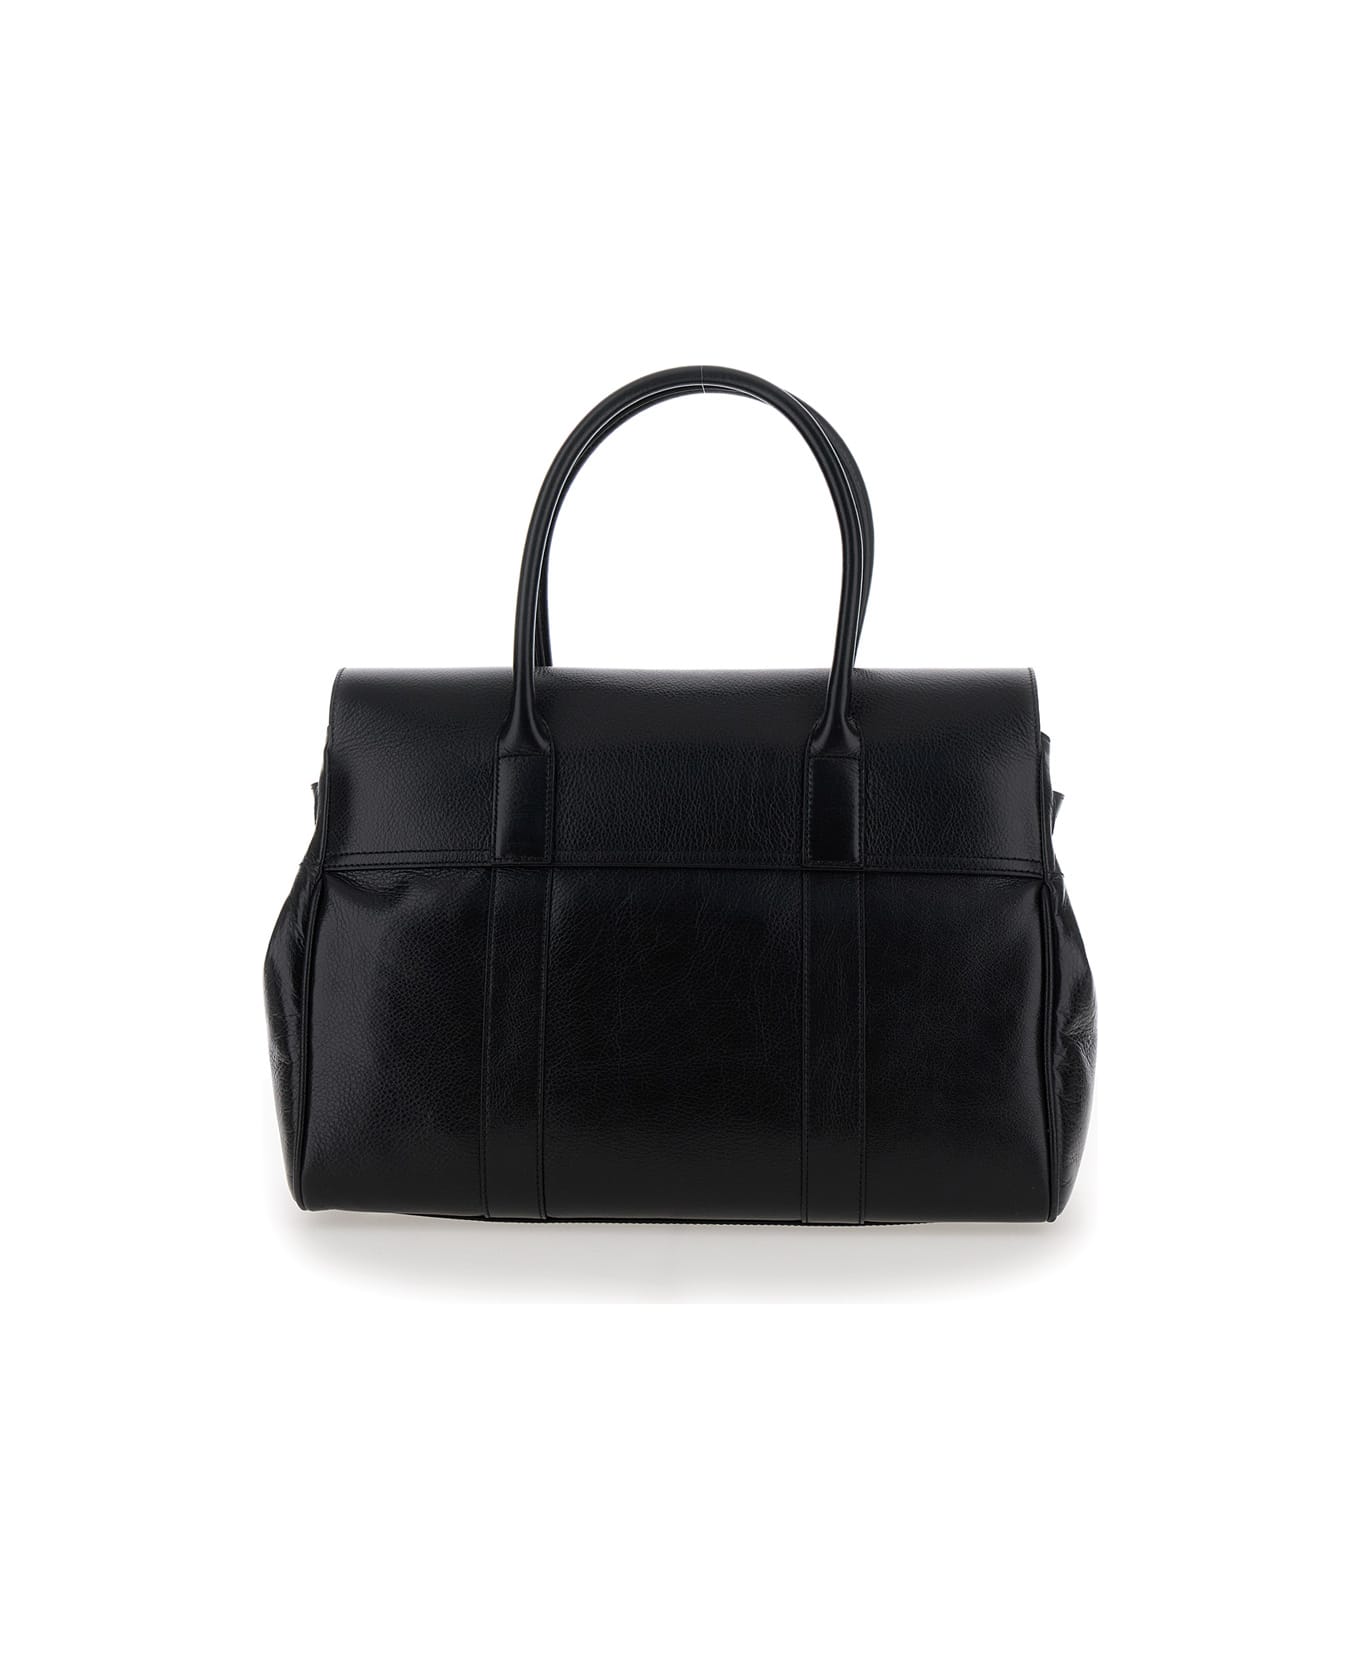 Mulberry 'bayswater' Black Handbag With Postman's Lock In Hammered Leather Woman - Black